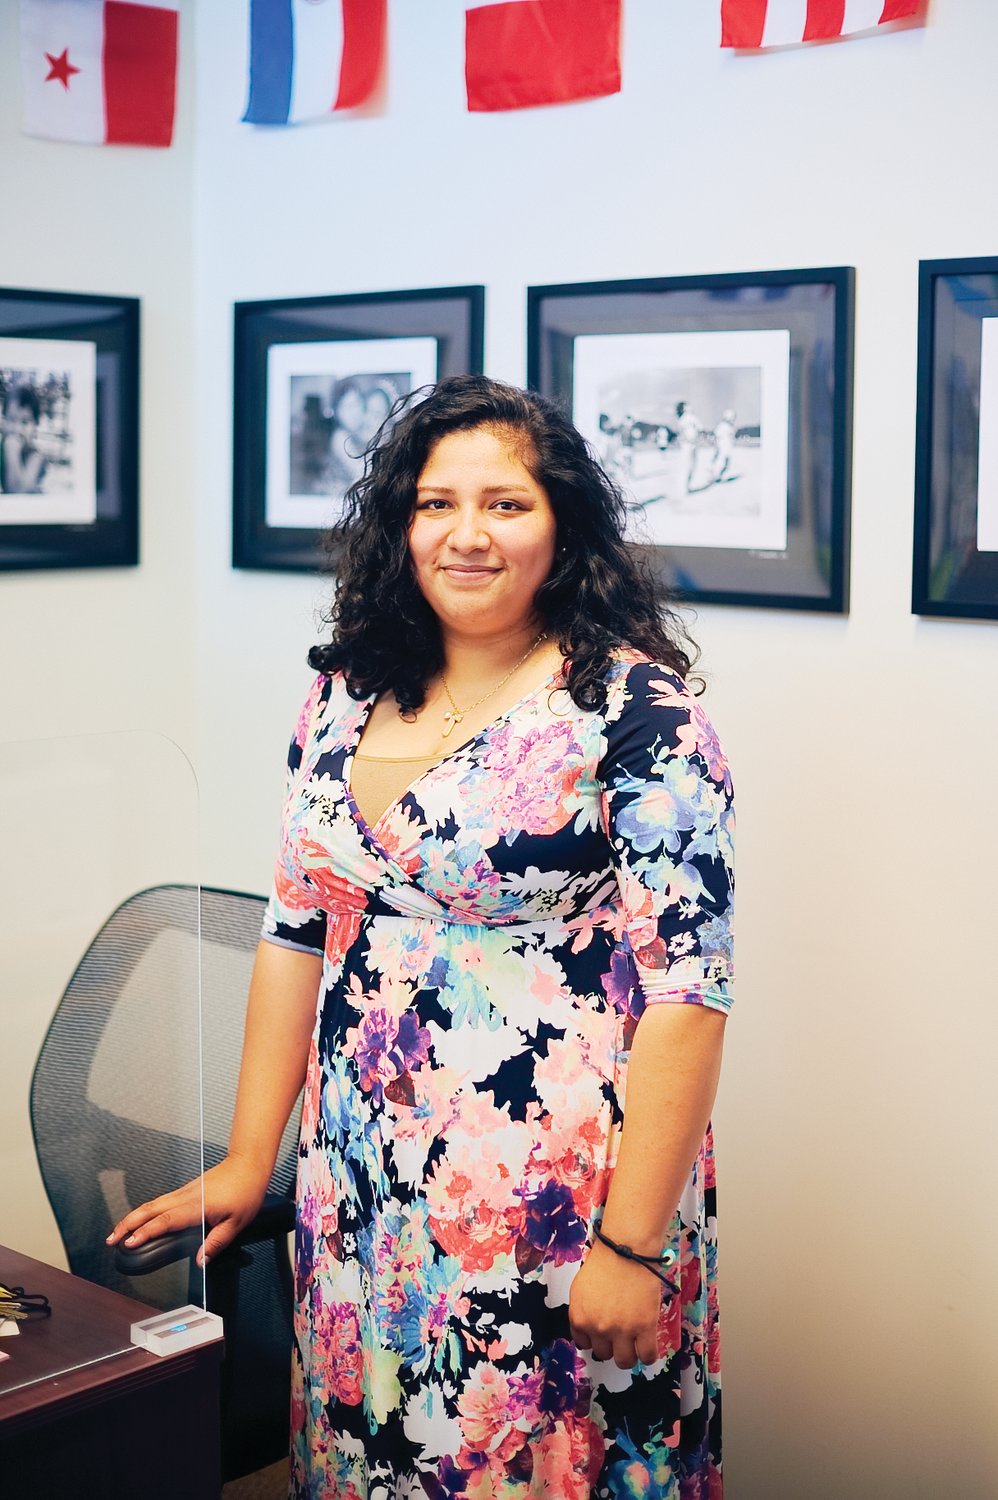 Deputy director Hannia Benitez (shown here) will lead the Hispanic Liaison’s new Sanford office, which opened just last week. A Siler City resident, Benitez has also lived in Sanford.